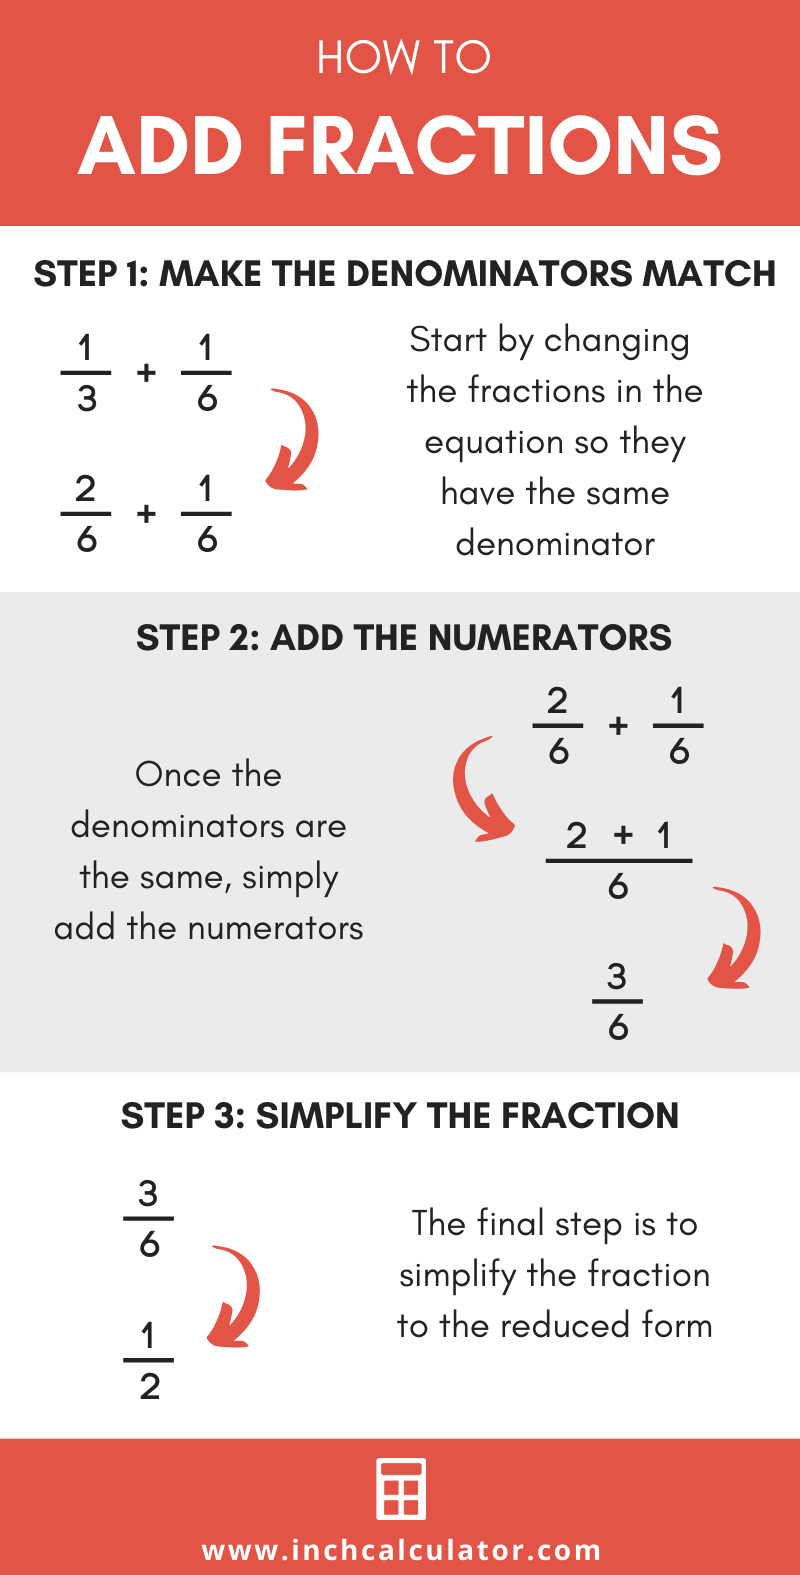 Illustration showing the three steps to add two fractions